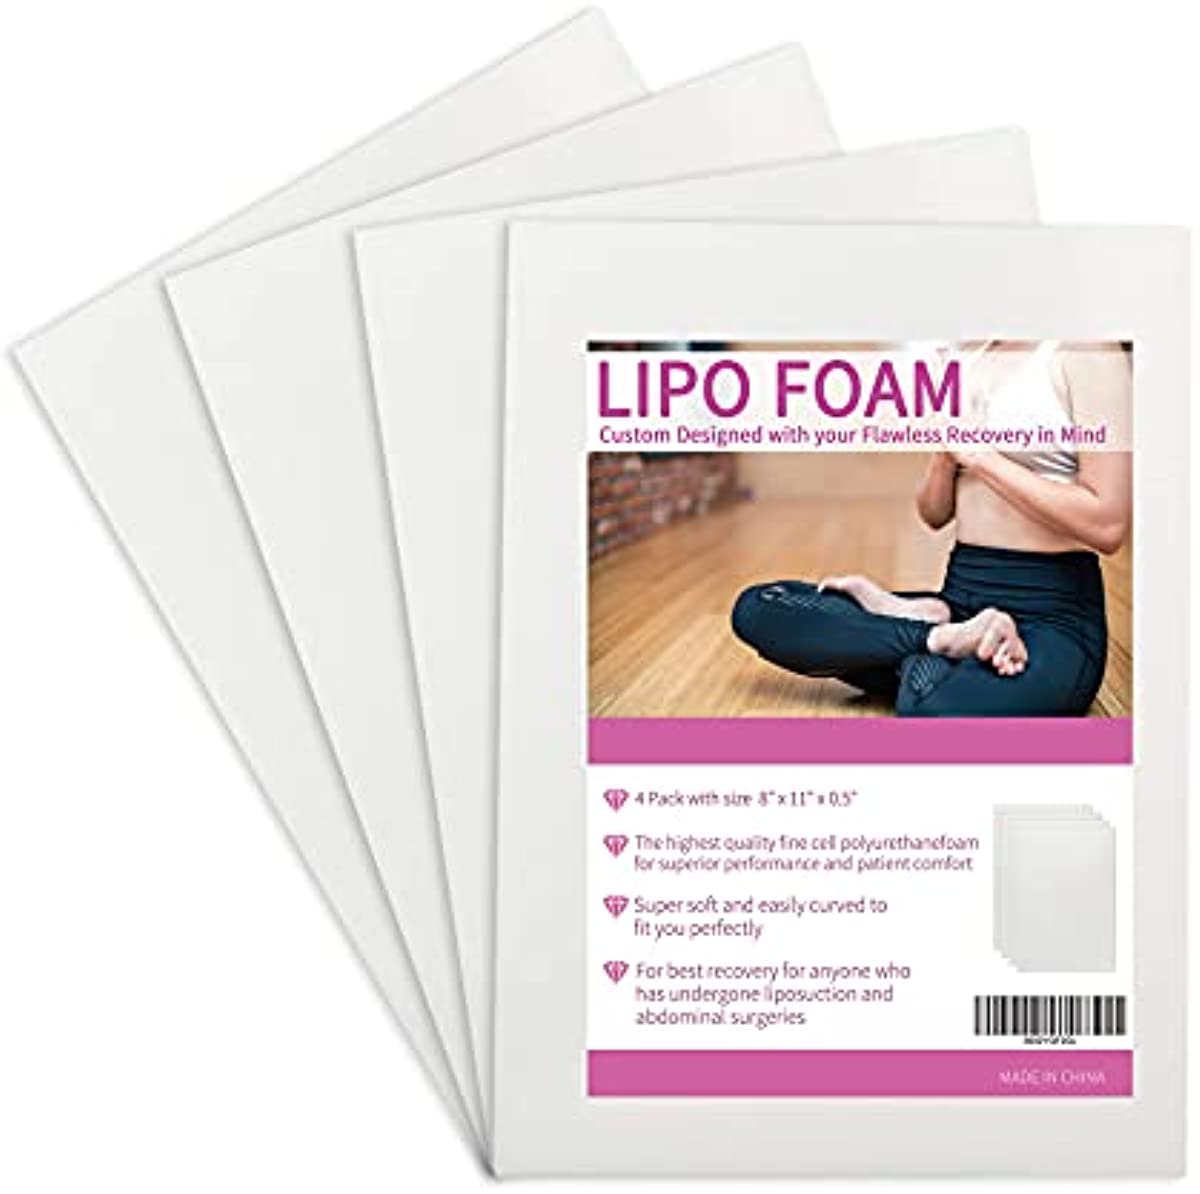 Lipo Foam Pads for Post Surgery,Birllaid Bbl Foam Boards after Lipo,Help Out When Using Ab Board Compression Garments Tummy Tuck, 4 Pack Liposuction Surgery Foam Sheet for Recovery 8\"X11\"